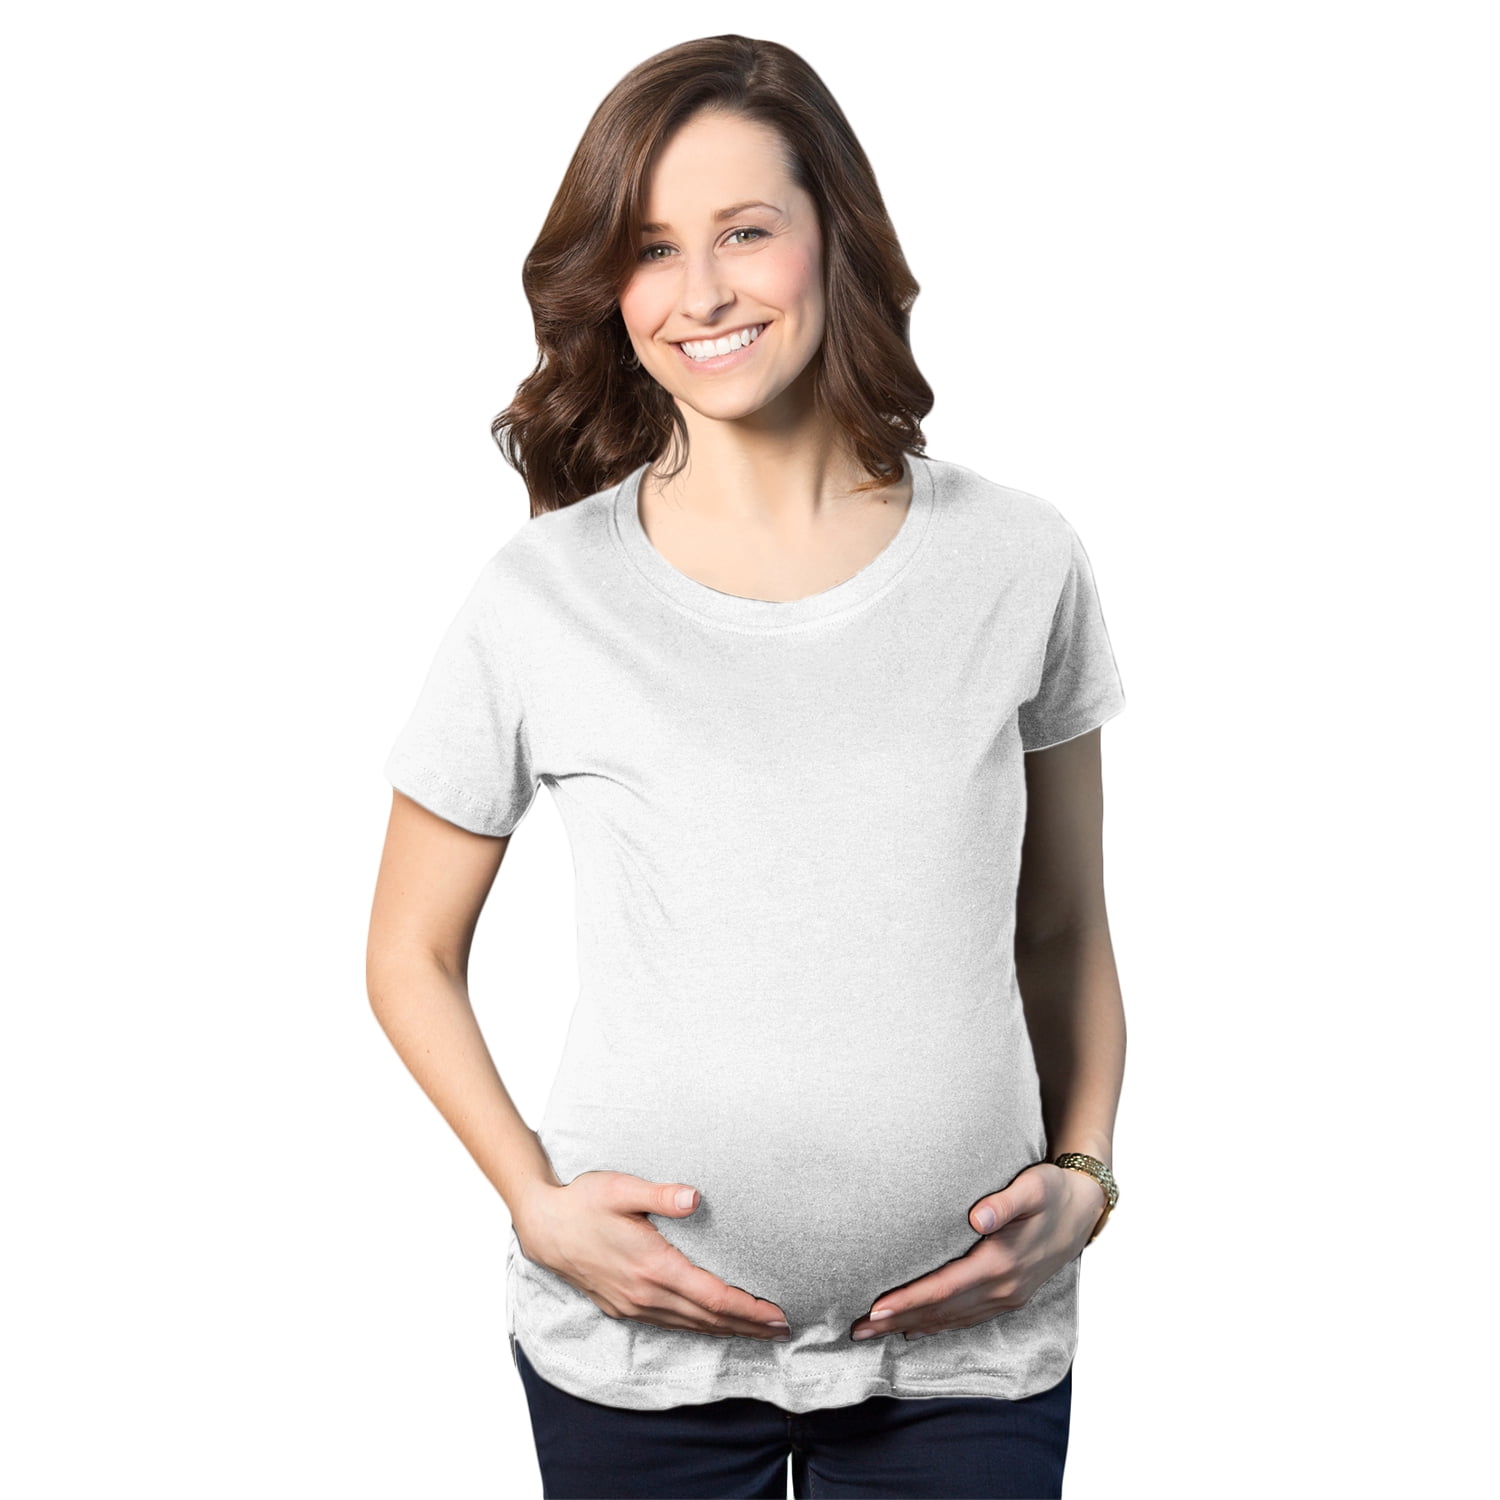 Bhome Maternity Tops Flying Shorts Sleeve Tshirt Side Ruched Pregnant Blouse Casual Pregnancy Tunic 